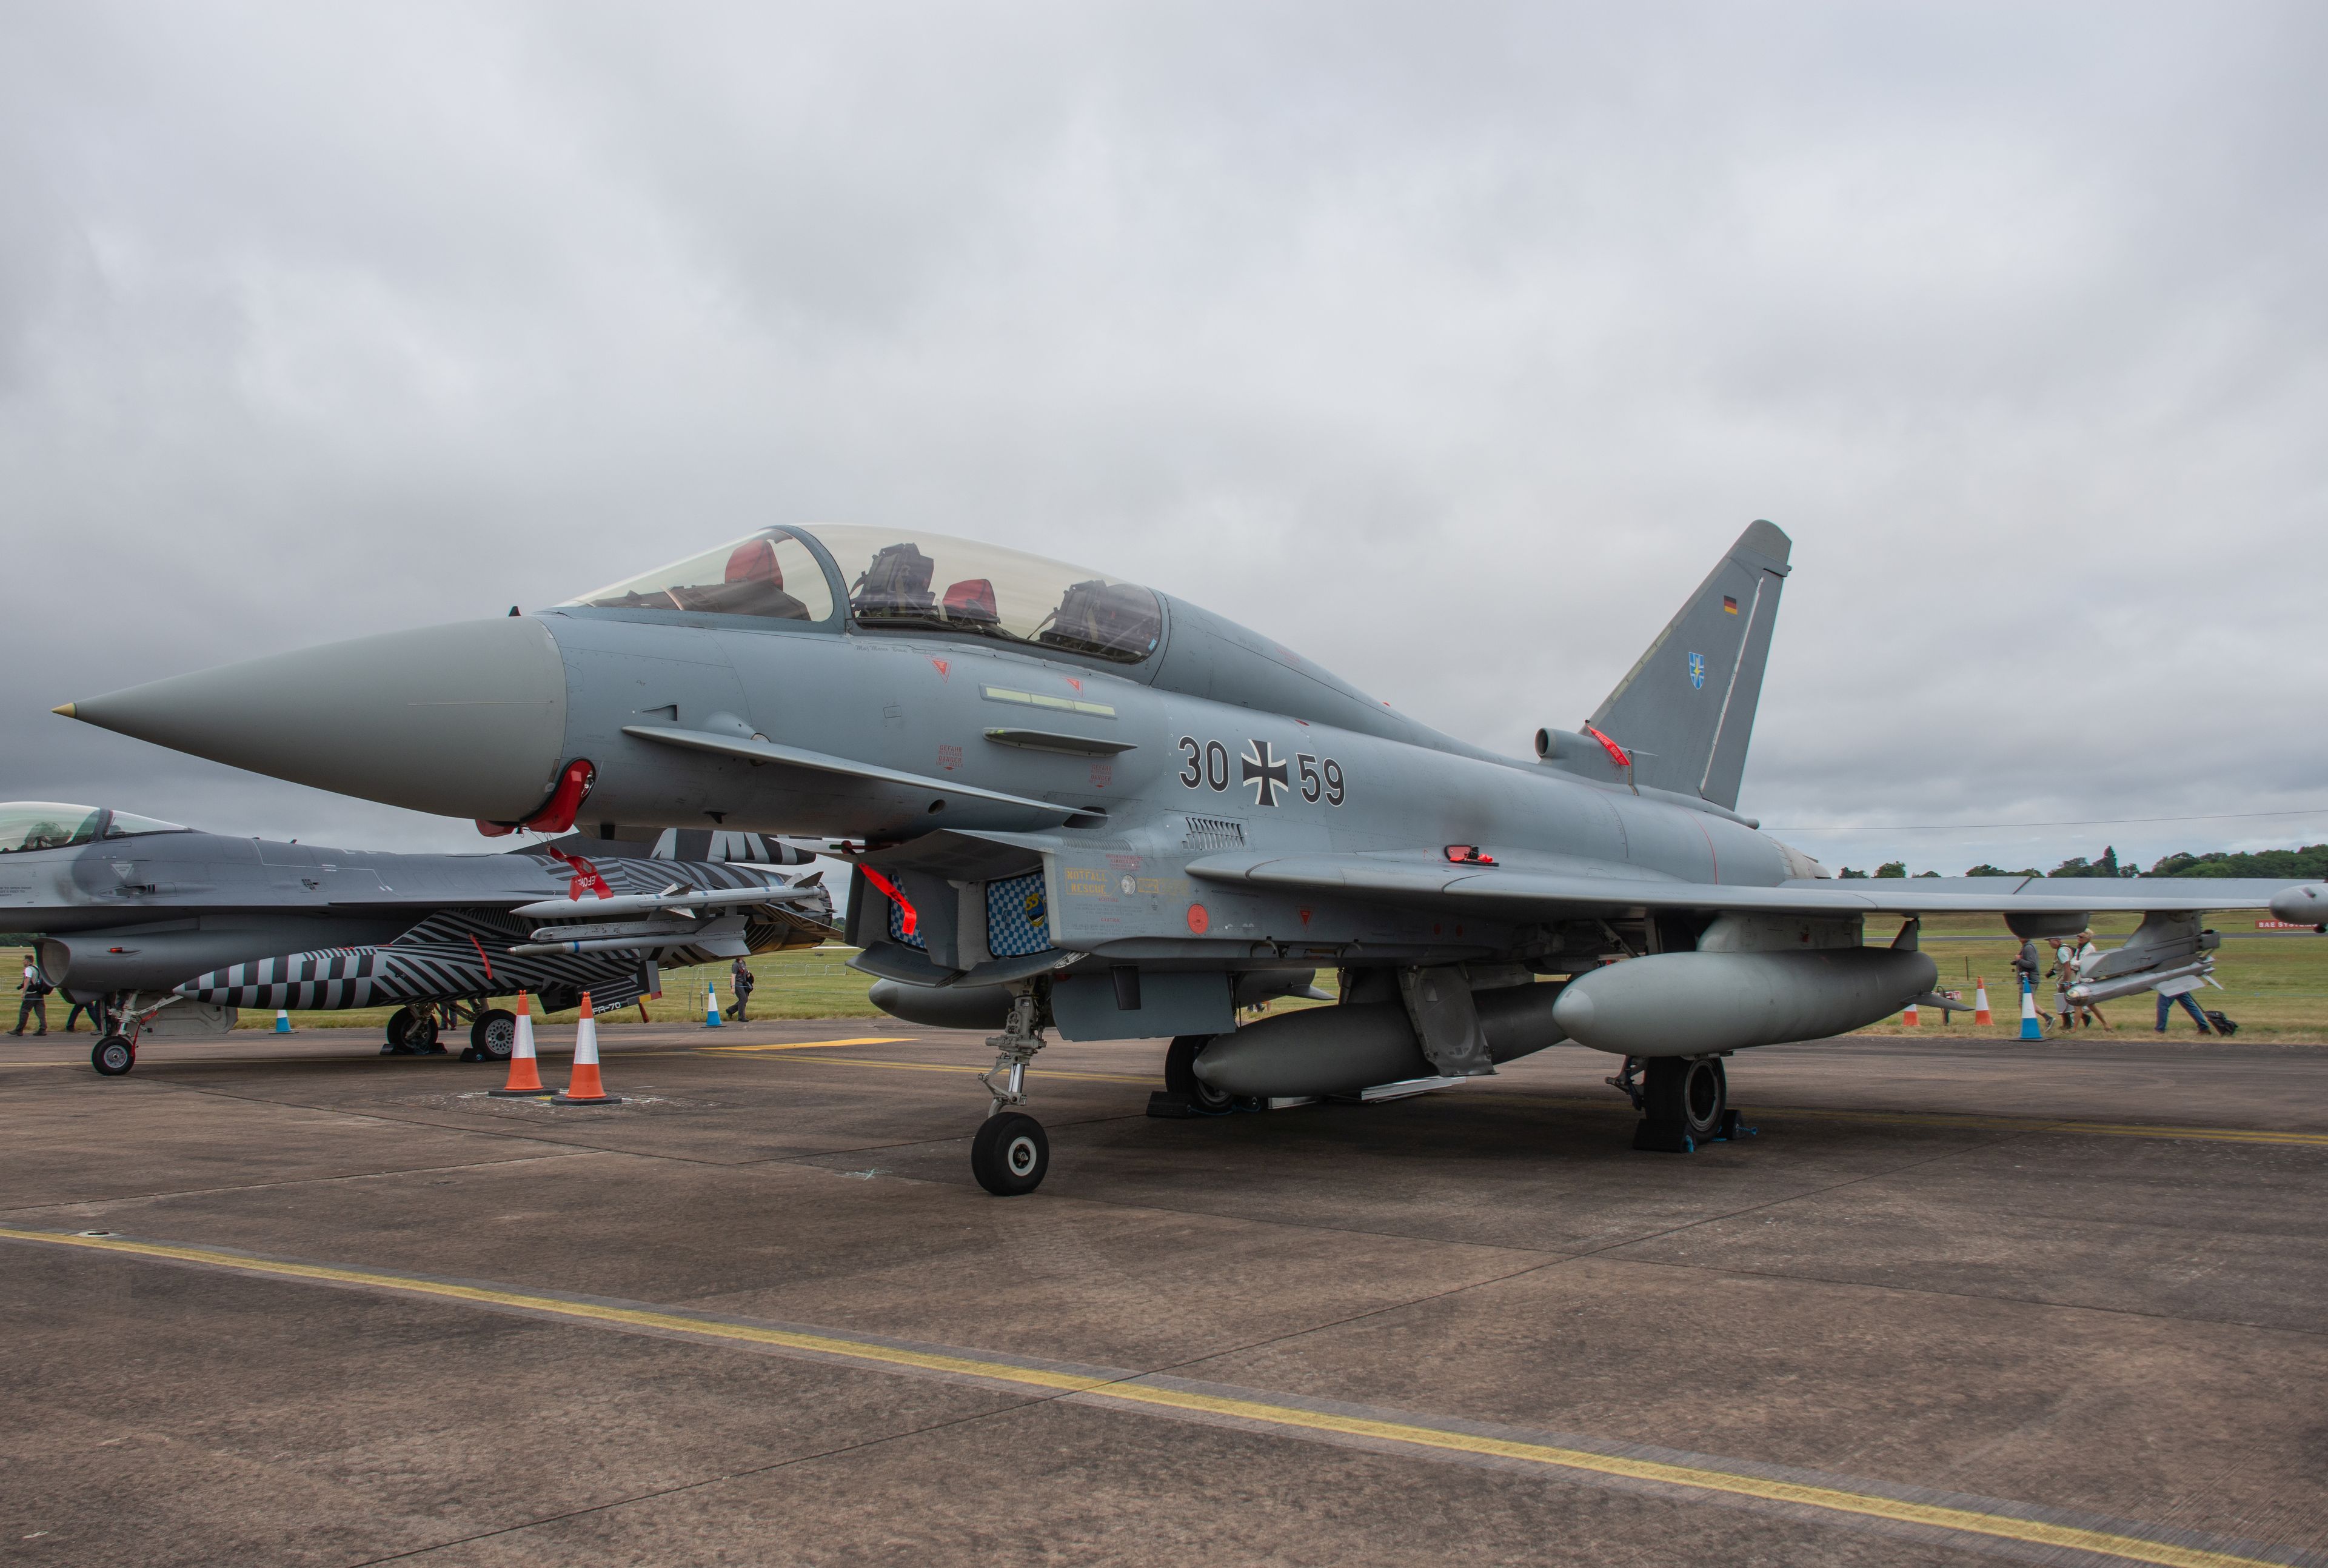 30+59/30+59 German Air Force Eurofighter Typhoon Airframe Information - AVSpotters.com